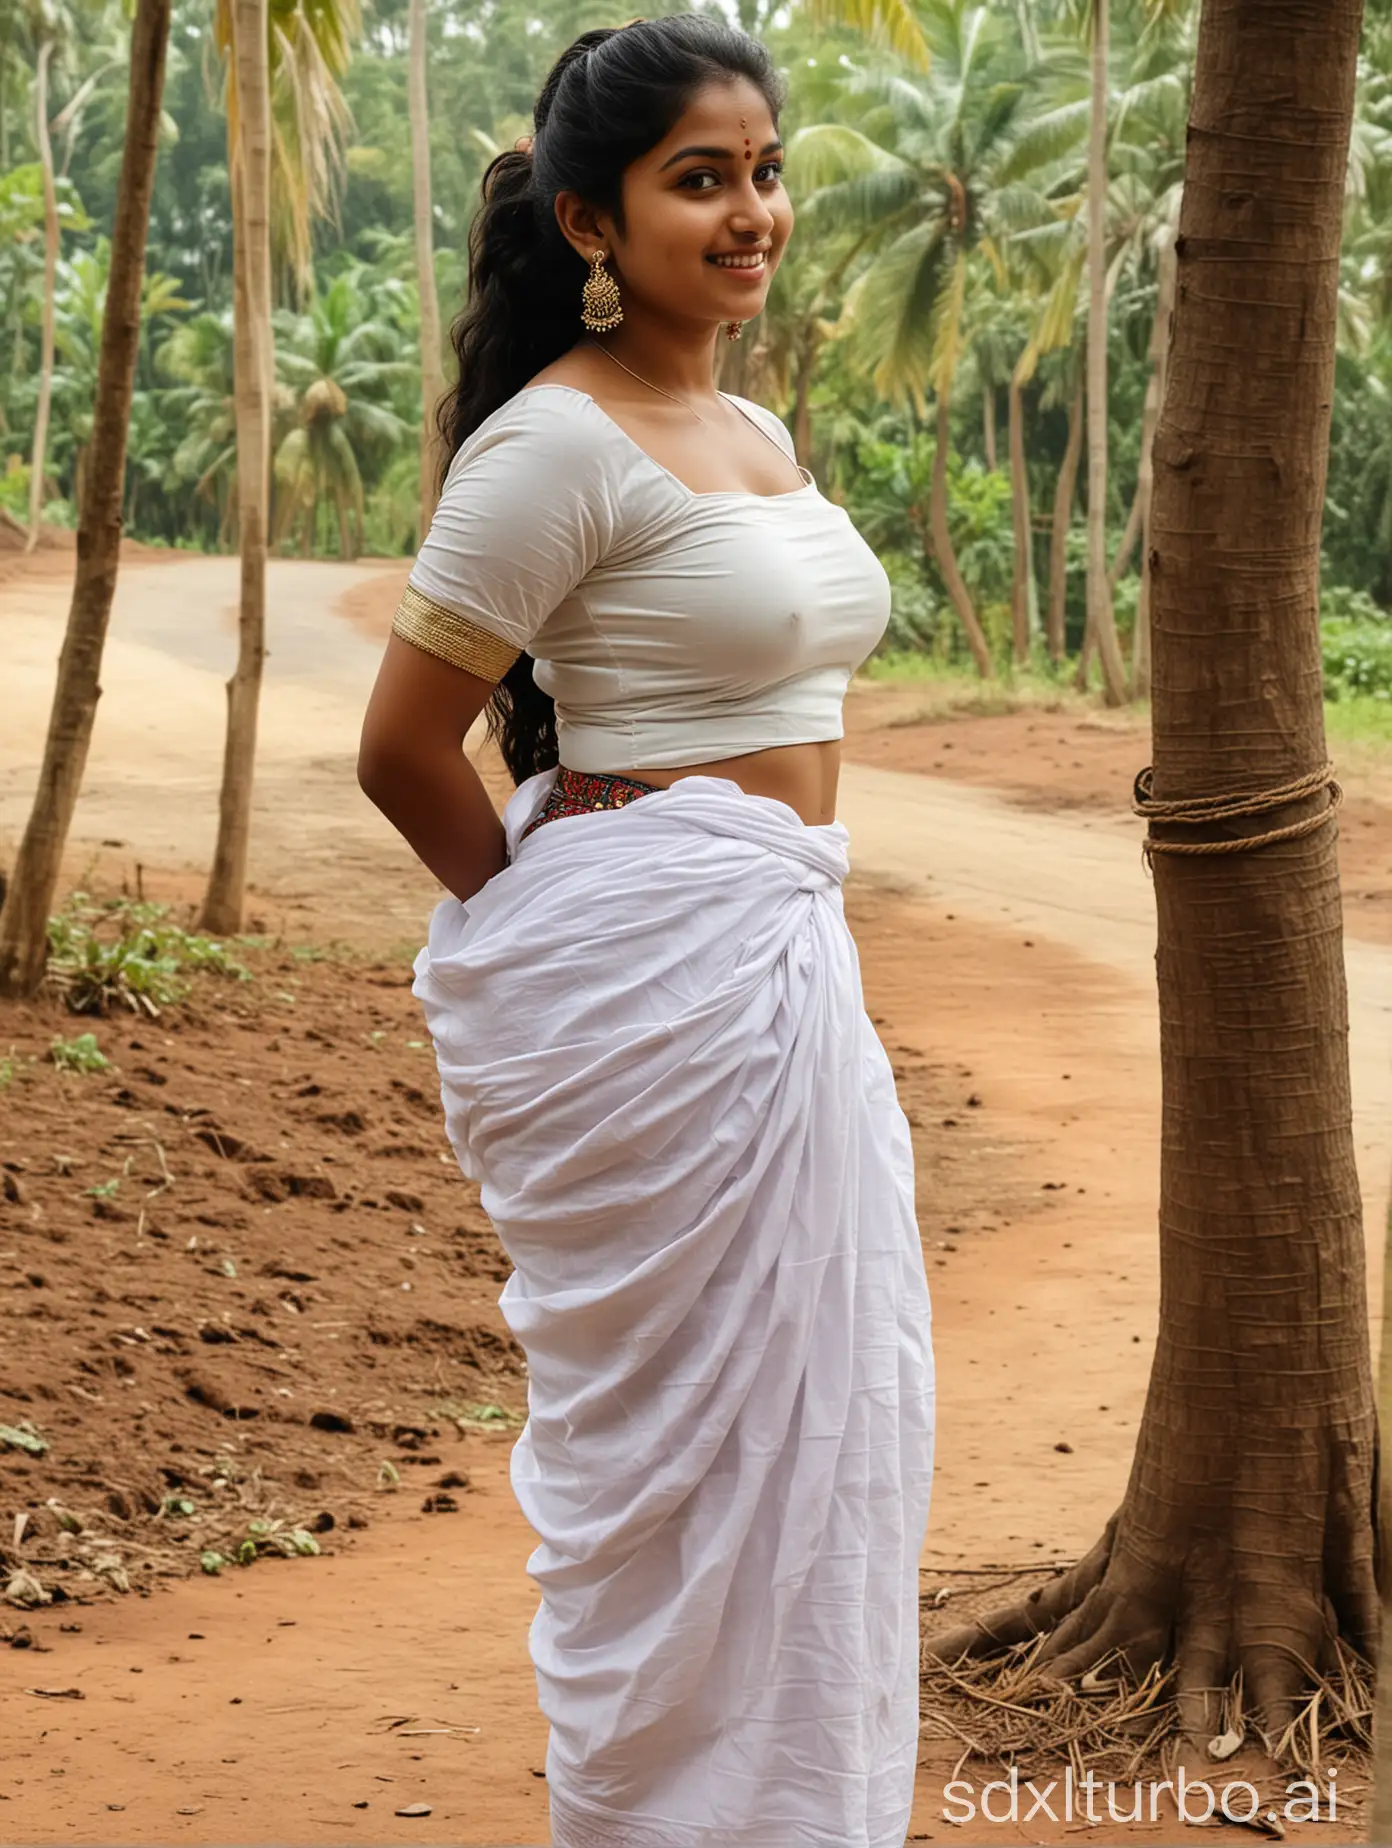 Kerala-Village-Girl-in-Traditional-Mundu-Dress-with-Curvy-Features